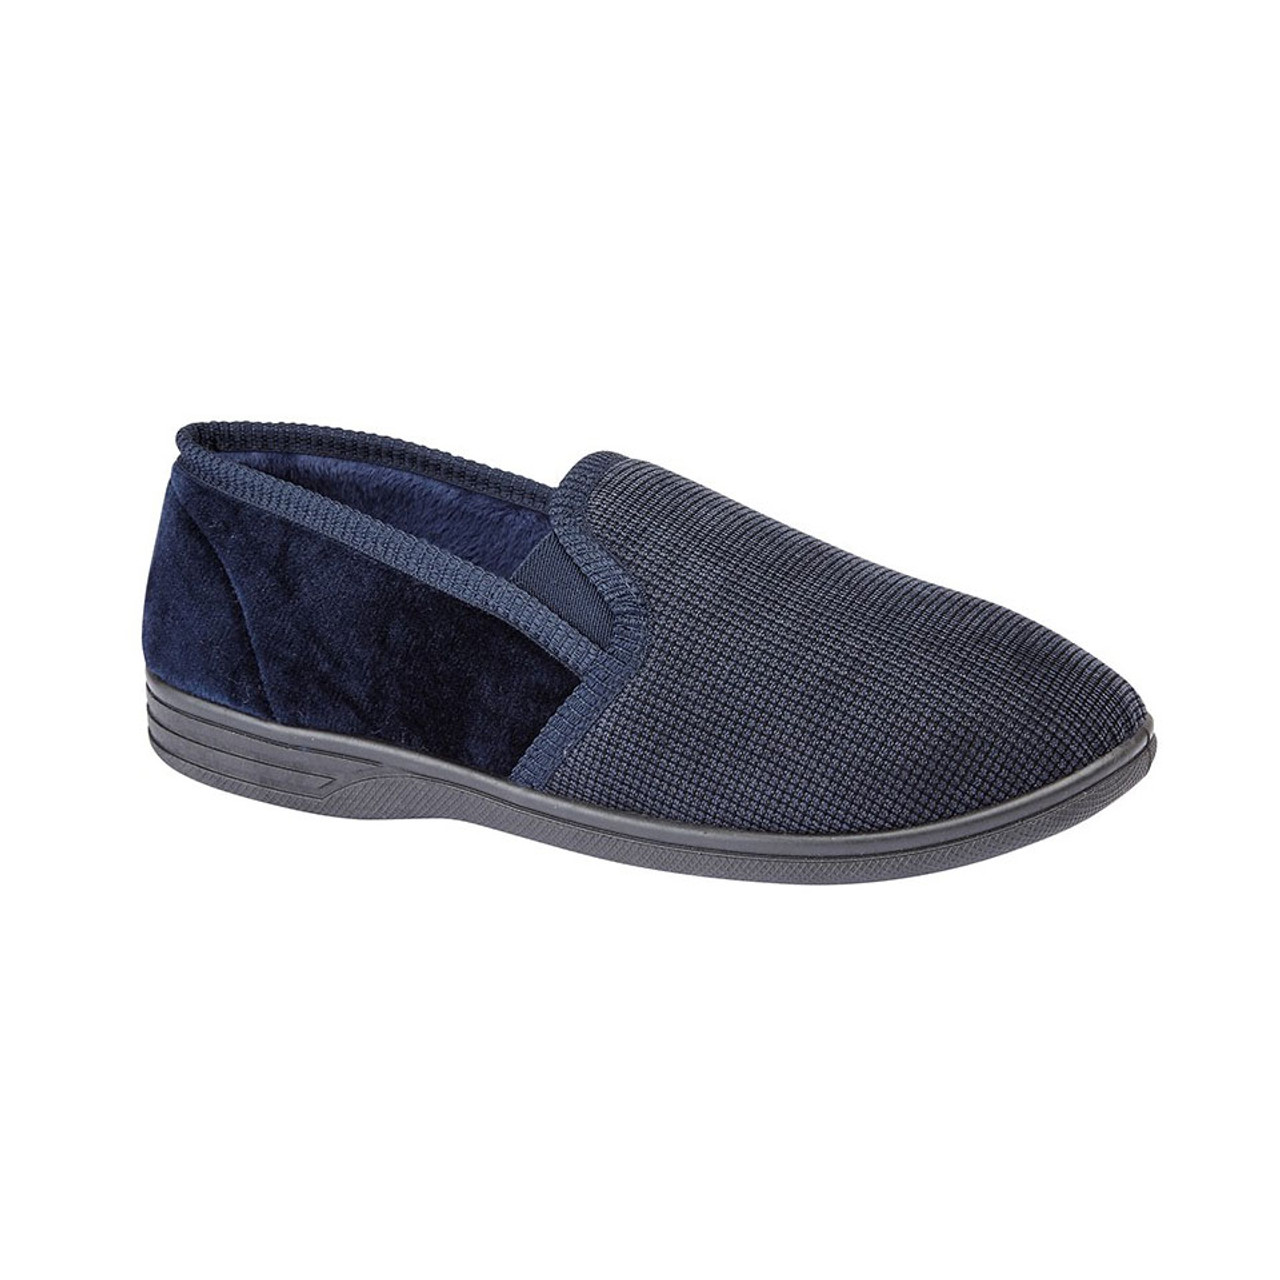 Twin gusset slippers for men